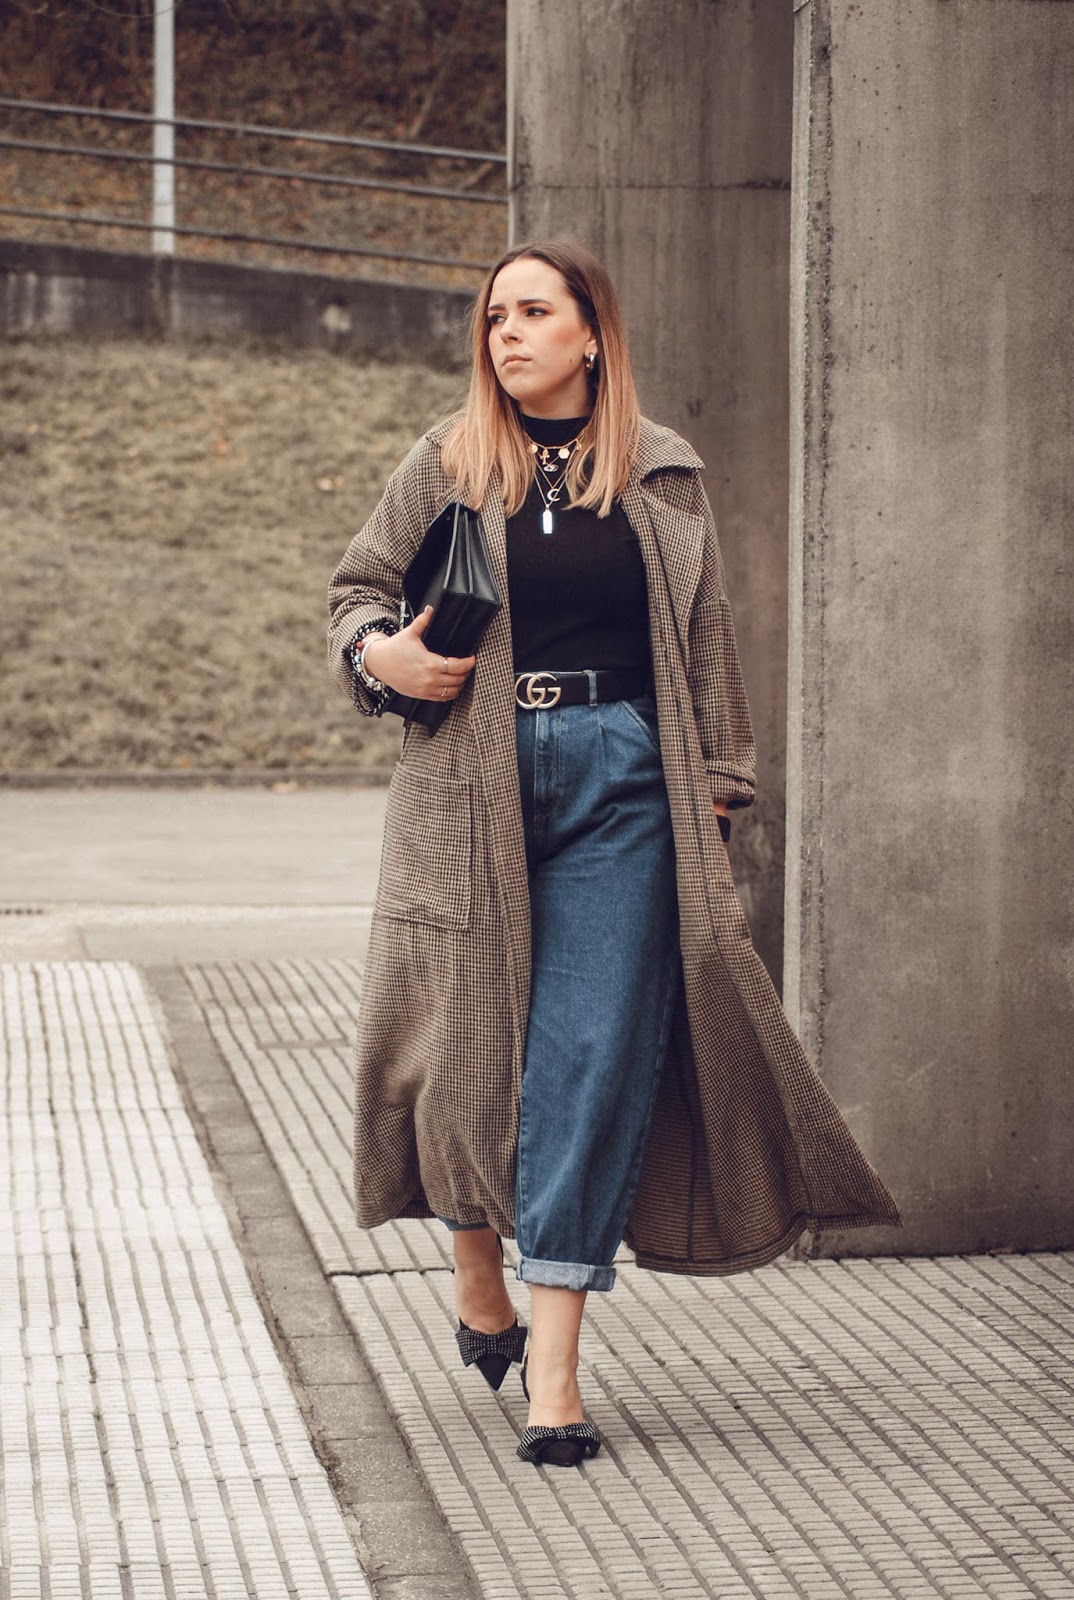 Outfit con pantalones slouchy